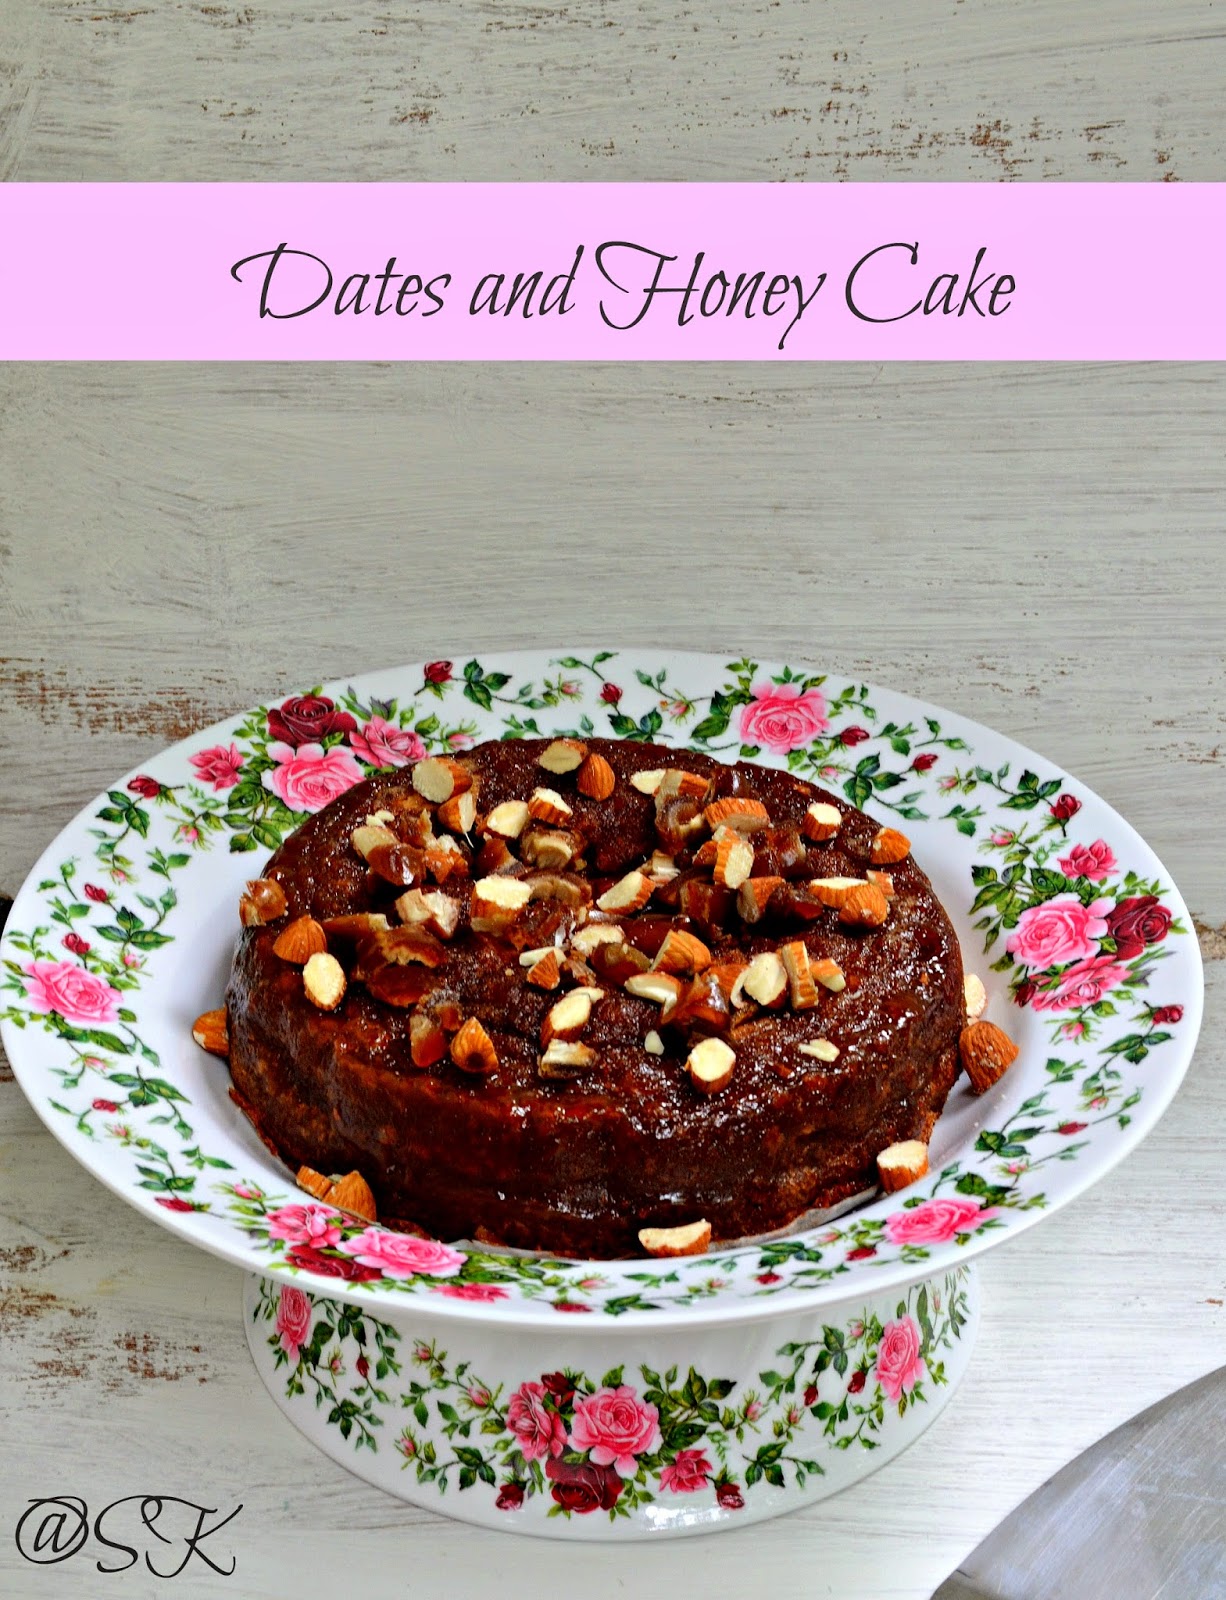 arabic dates and honey cake - soft and goey cake for parties - home baker's challenge - step by step